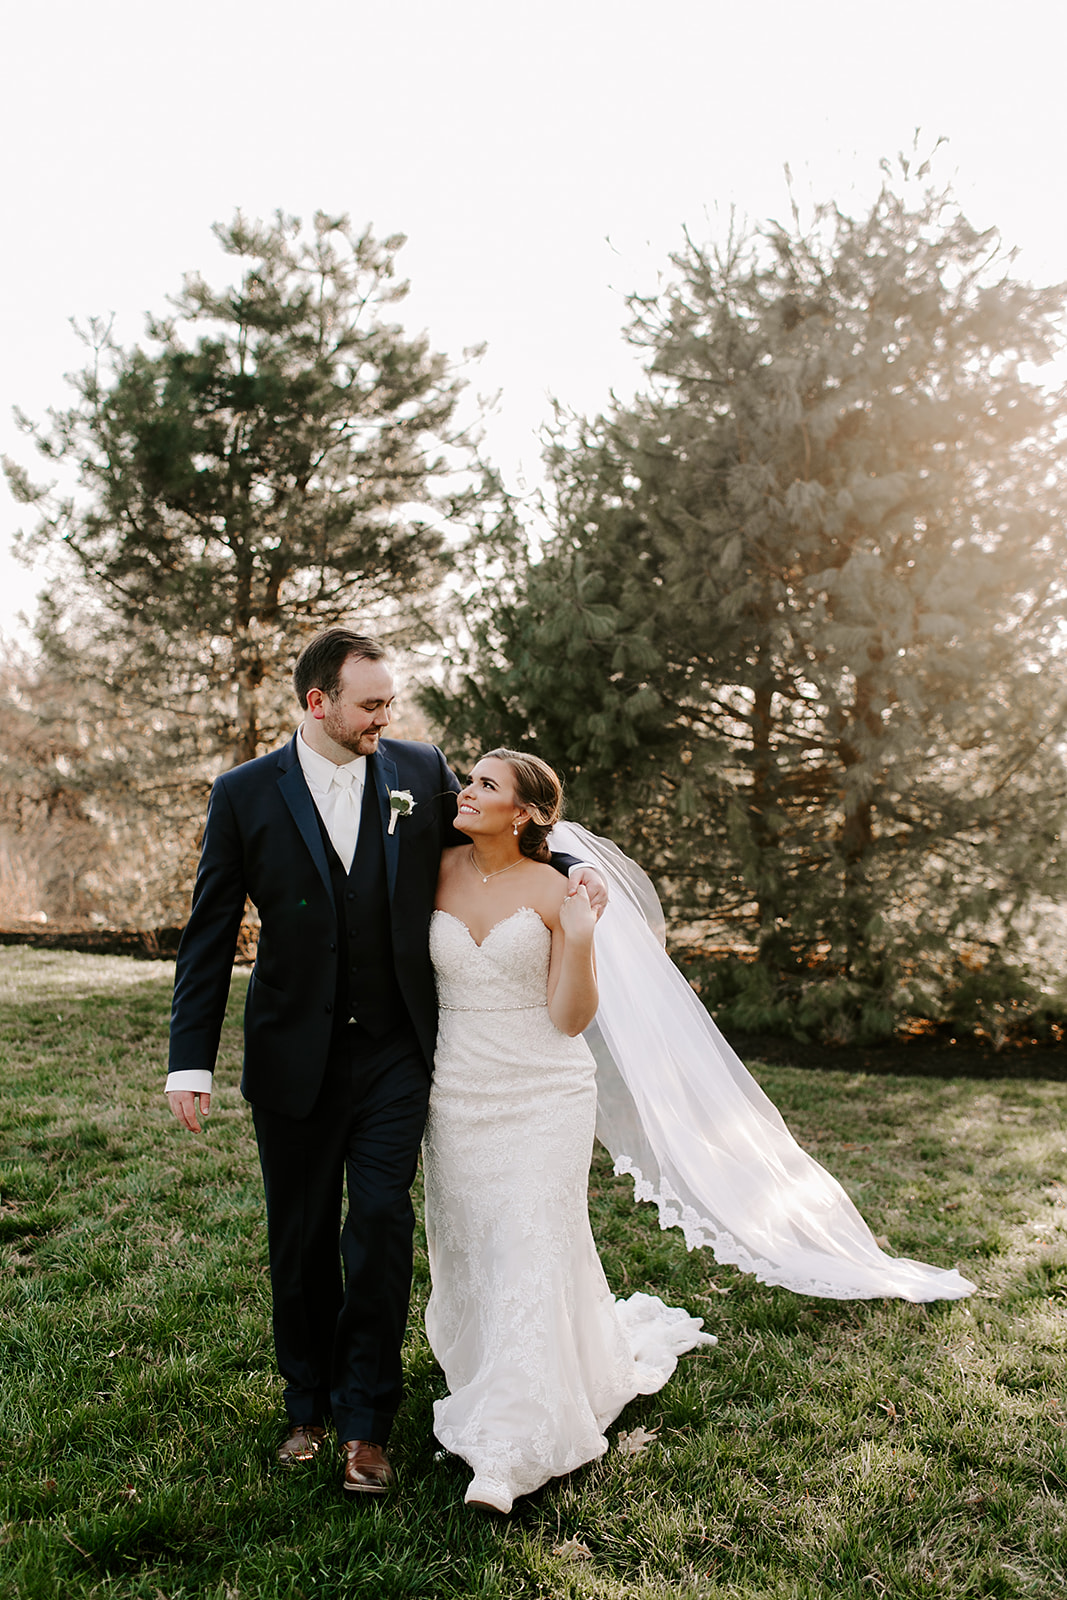 Lauren_and_Andrew_Mustard_Seed_Gardens_Noblesville_Indiana_by_Emily_Wehner_Photography-787.jpg